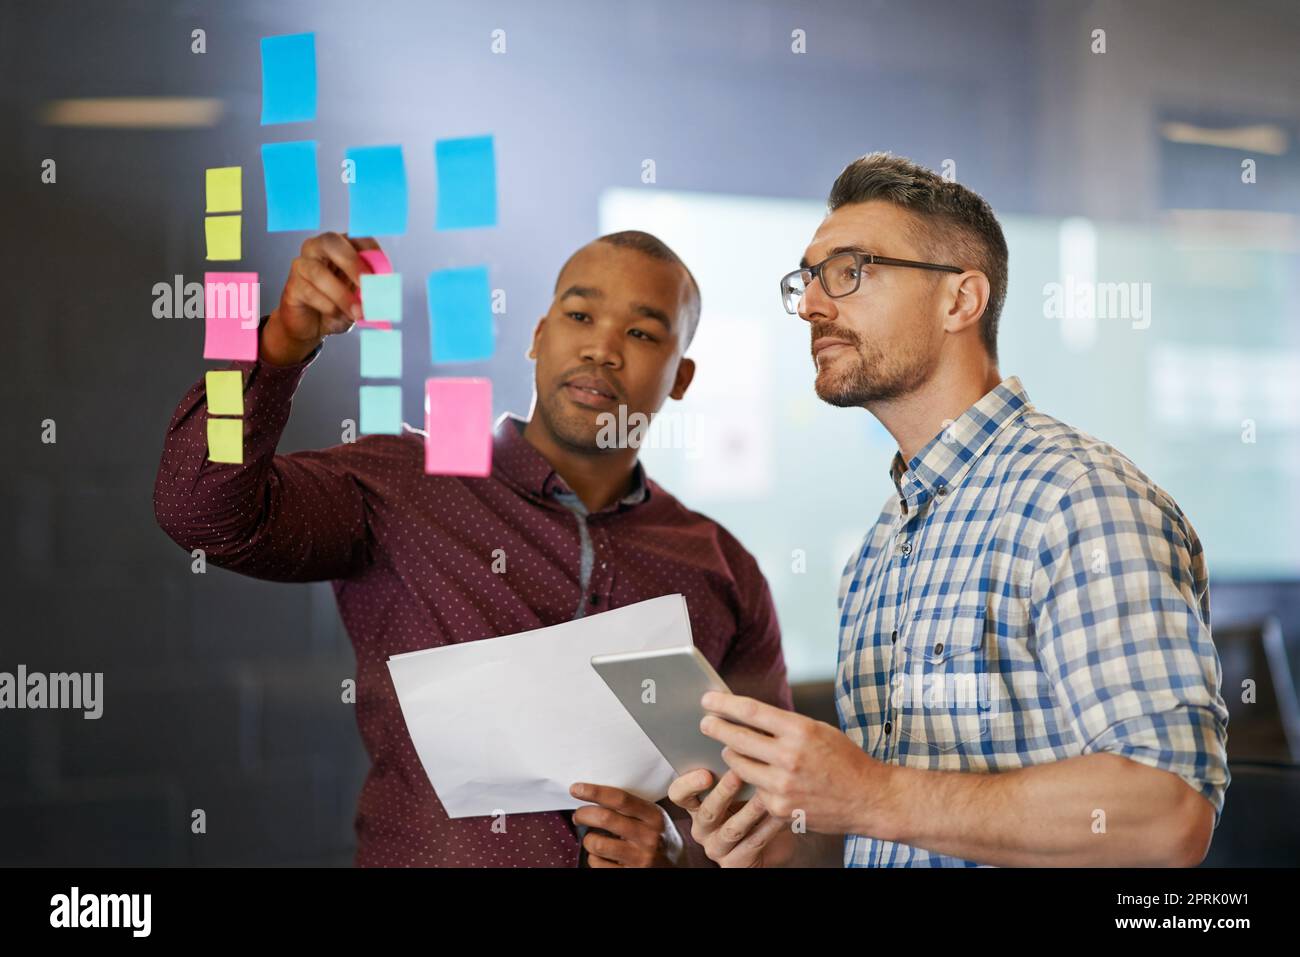 Together we can elevate our ideas towards success. two coworkers going over documents together. Stock Photo